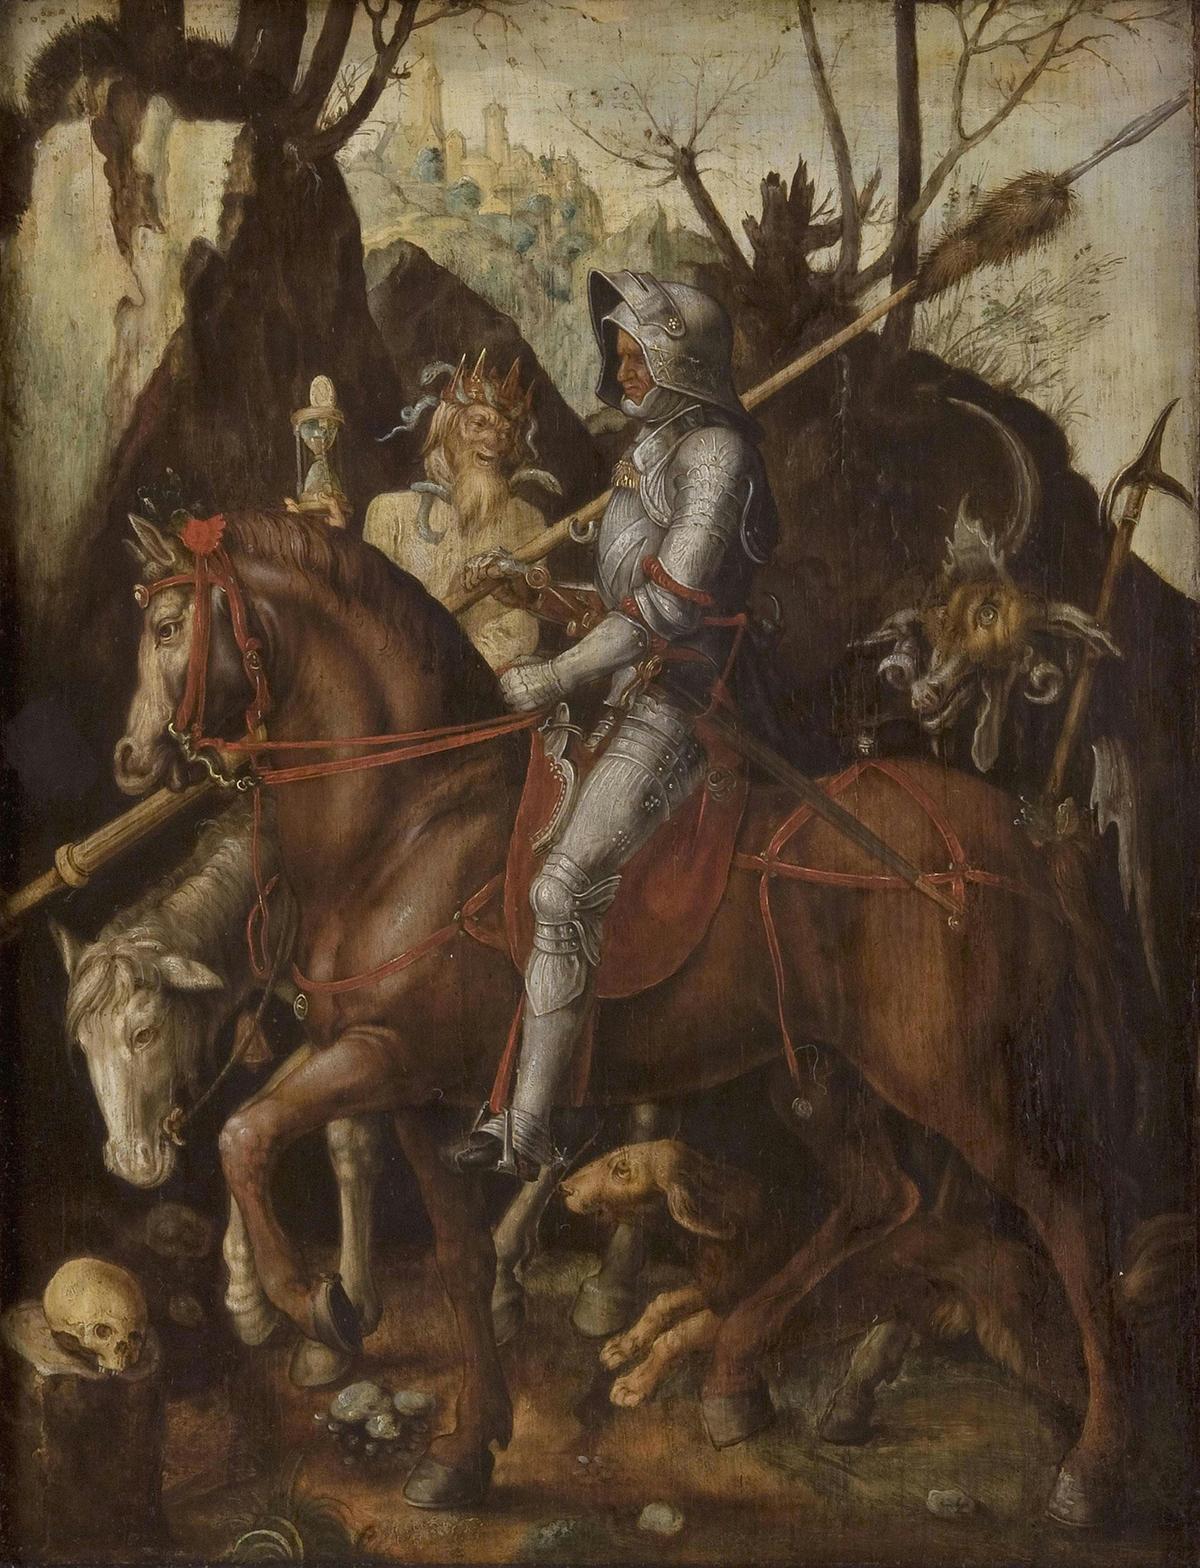 Hubristic individuals exhibit violence and aggression, seeking domination. "A Knight, Death, and the Devil," 16th century, attributed to Jakob Züberlin. Oil on panel. John G. Johnson Collection, 1917, Philadelphia Museum of Art, Philadelphia. (Public Domain)